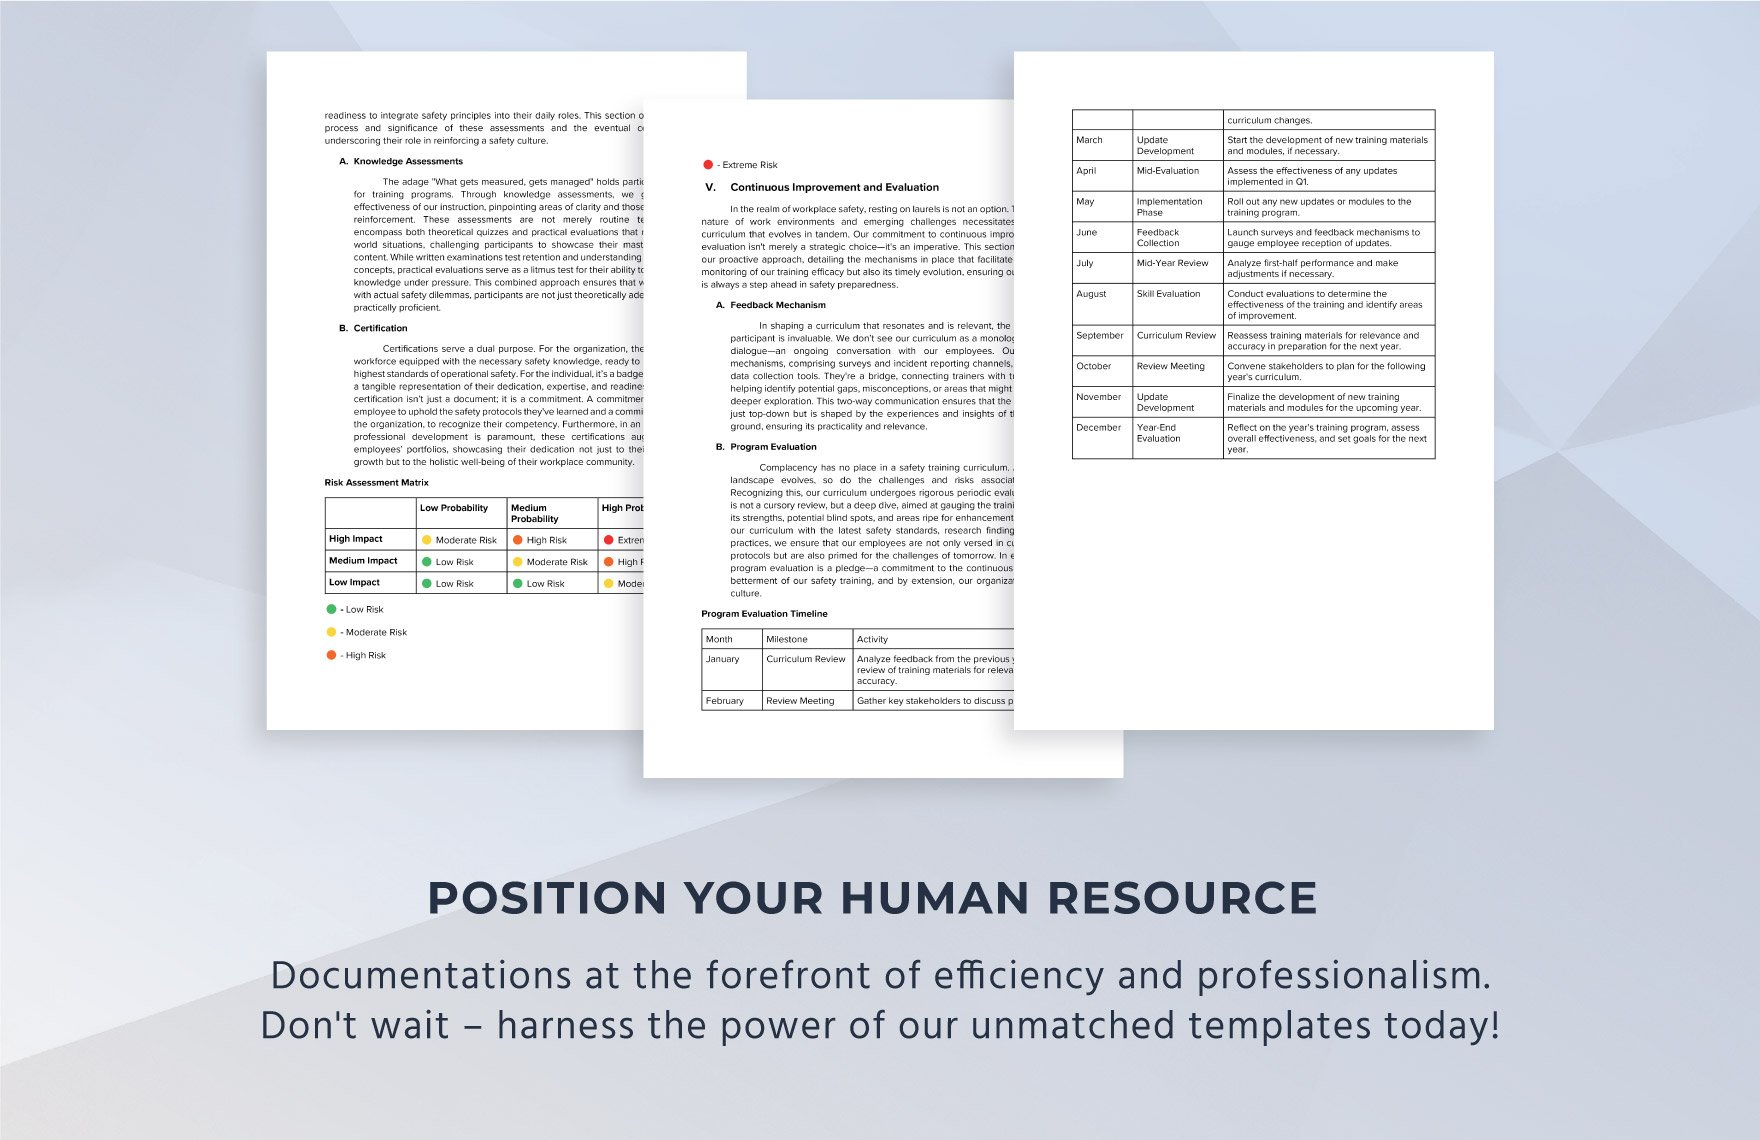 Full-scale Safety Training Curriculum HR Template